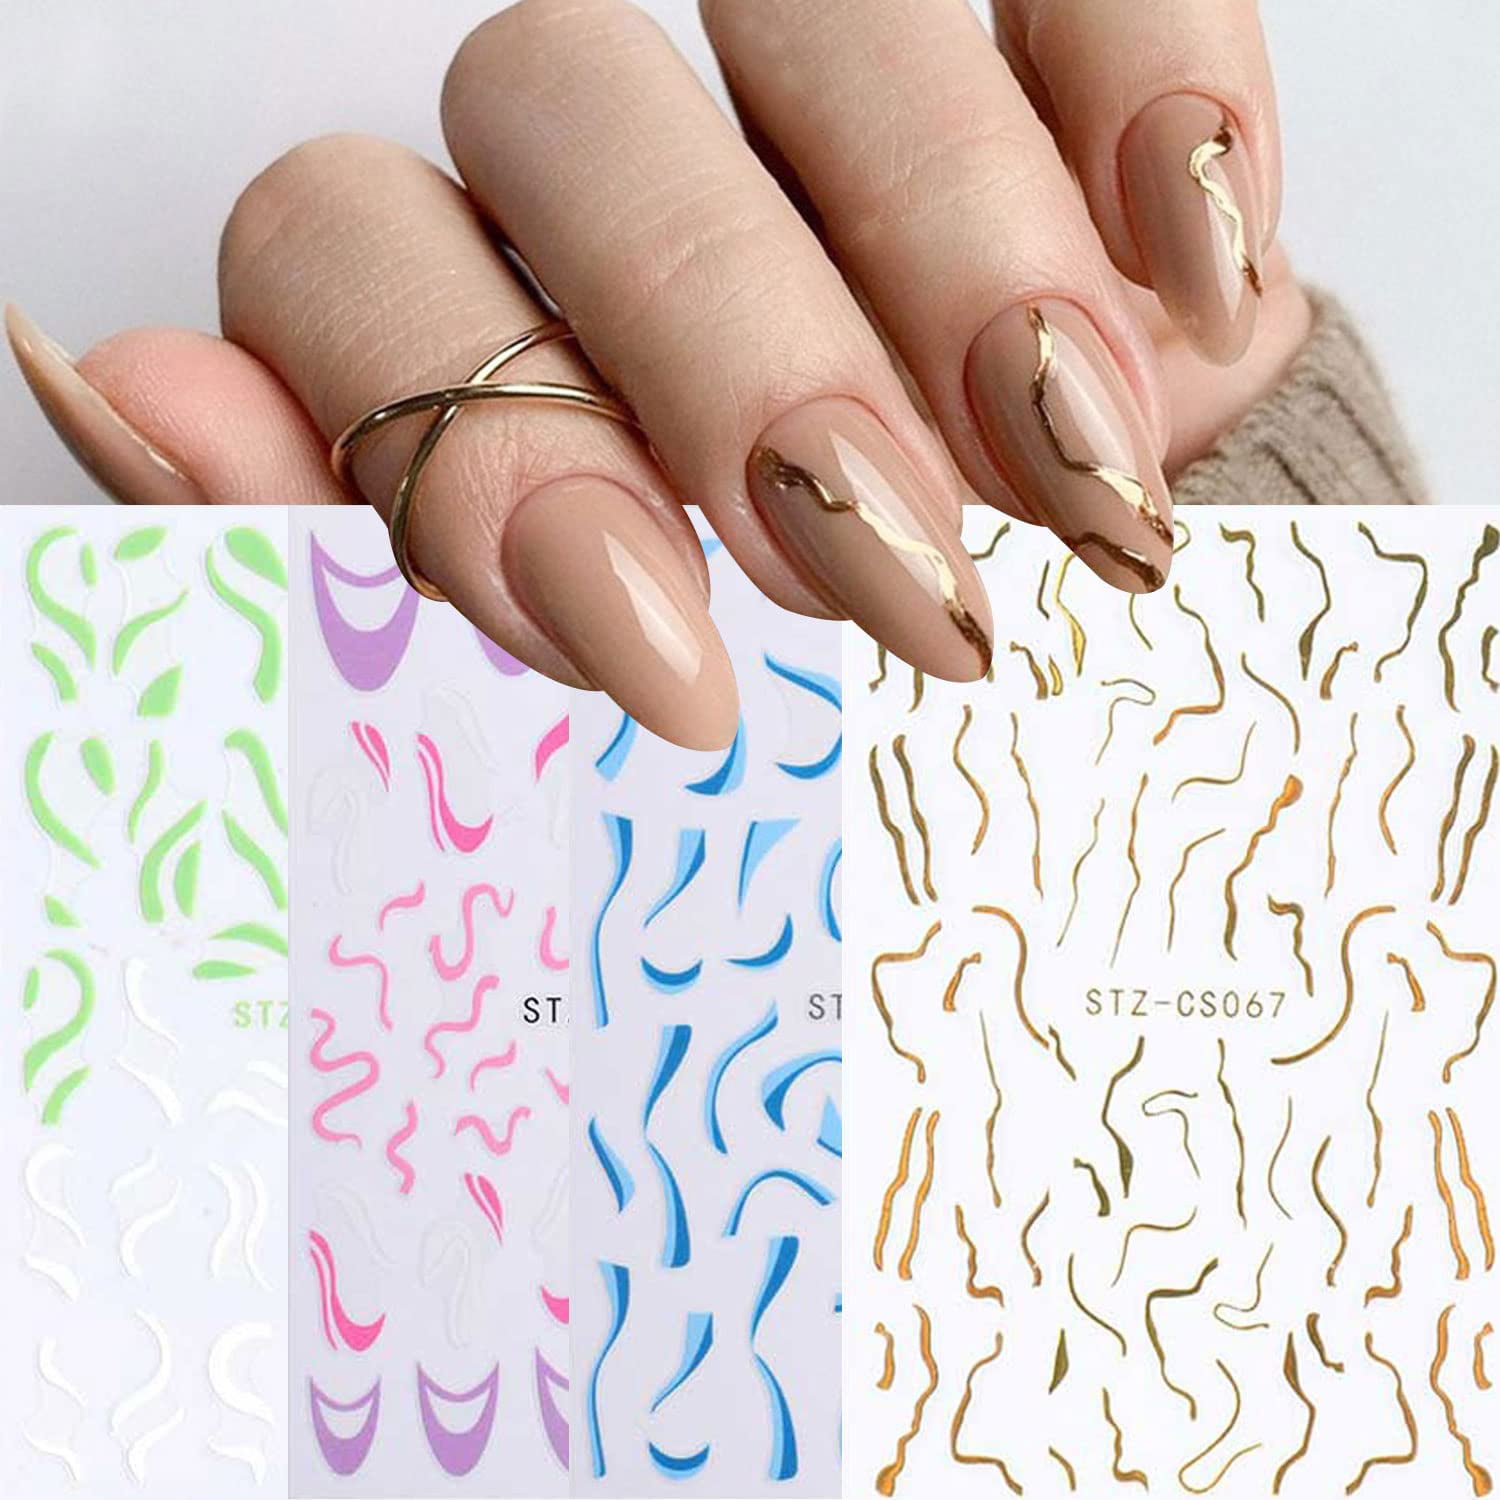 1 Lage Sheet Gold Shiny Nail Stickers Luxury Nail Salon Design Chic 3D Nail  Art Stickers Decals Self-Adhesive Manicure for Nails Decoration (003)